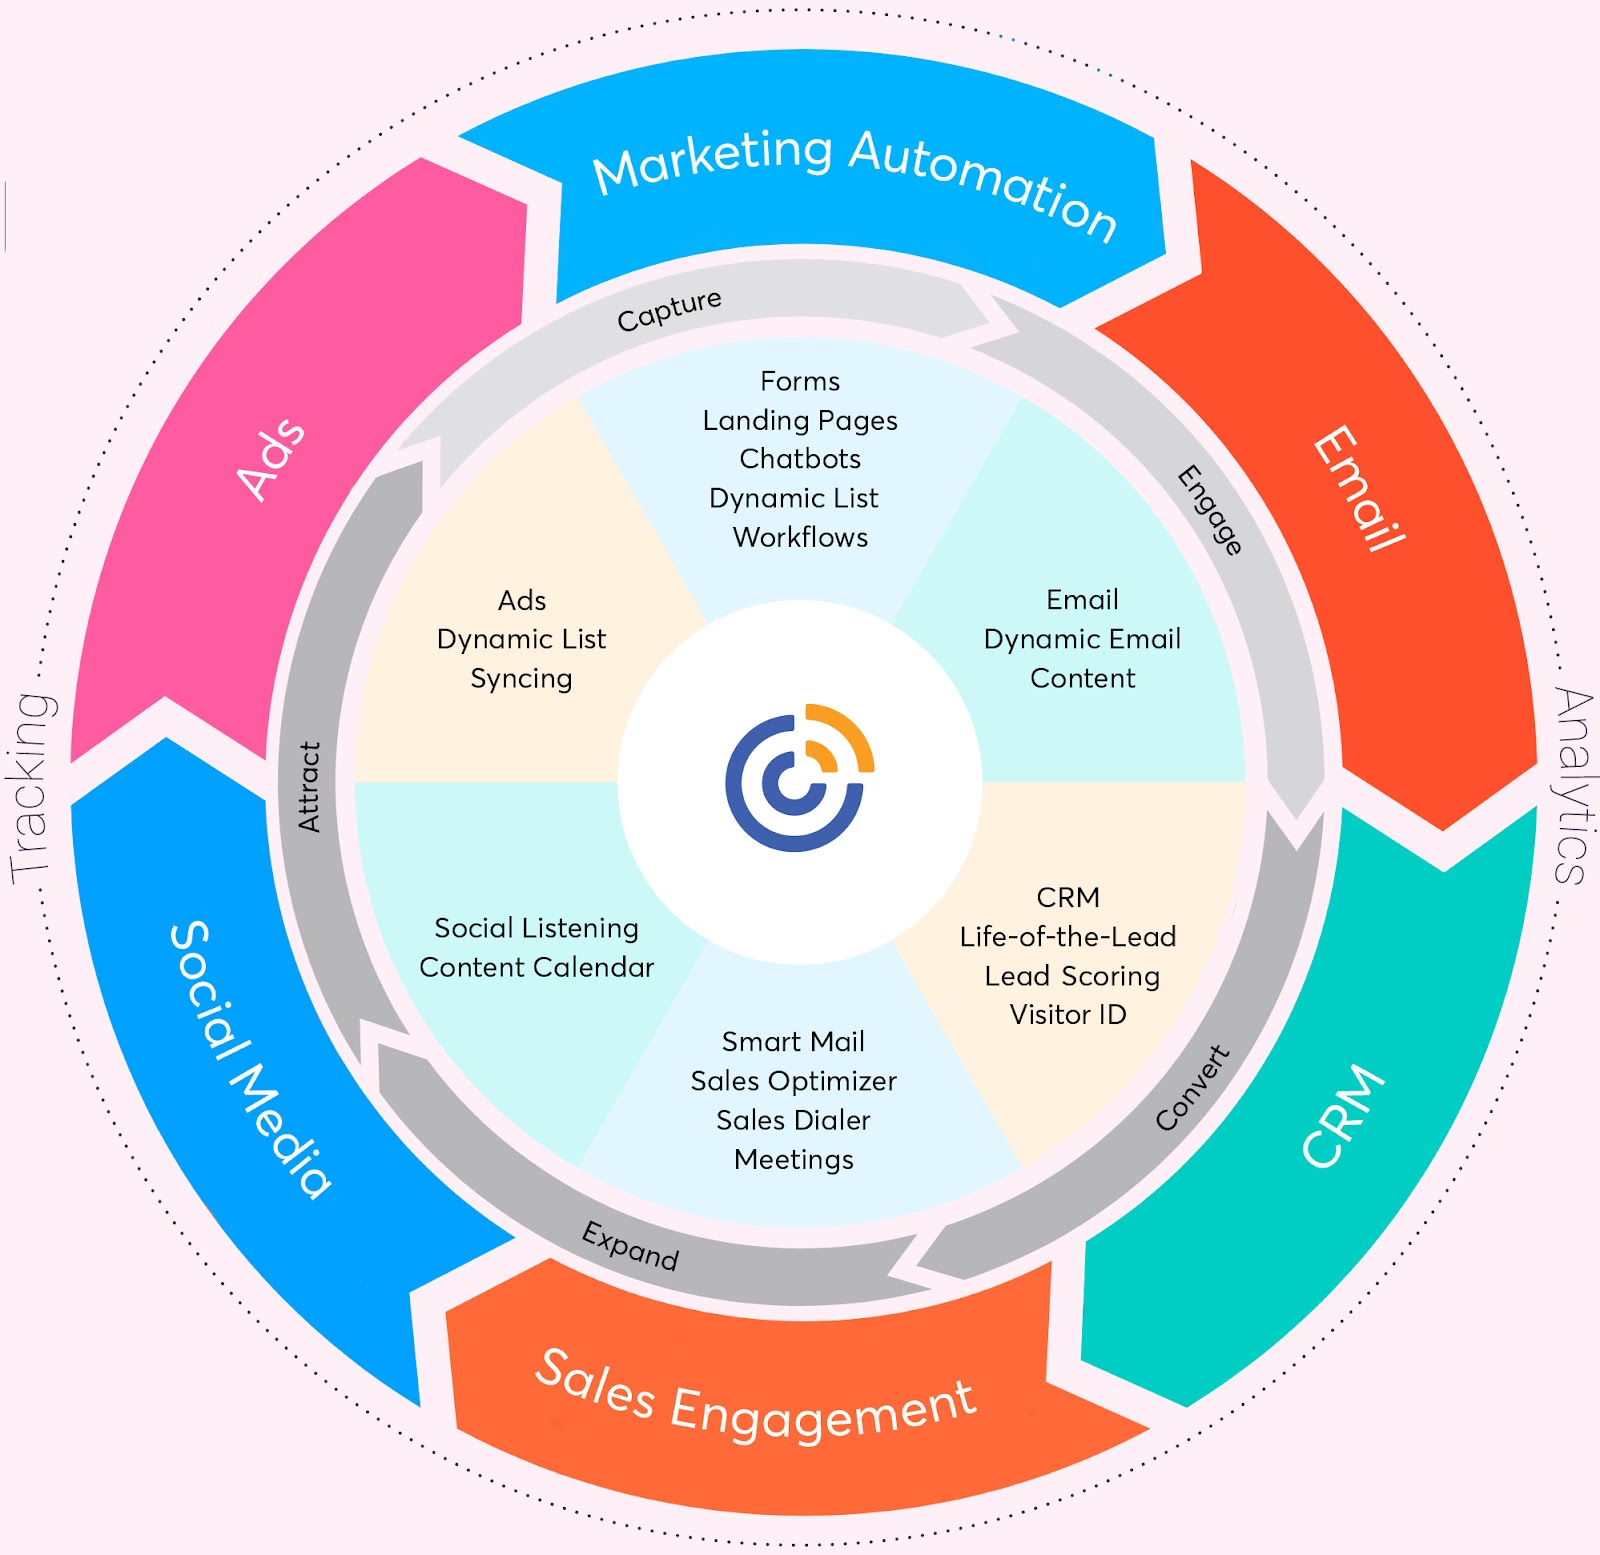 Constant Contact marketing flywheel for revenue growth -- attract, capture, engage, convert, and expand with digital marketing, CRM, and marketing automation